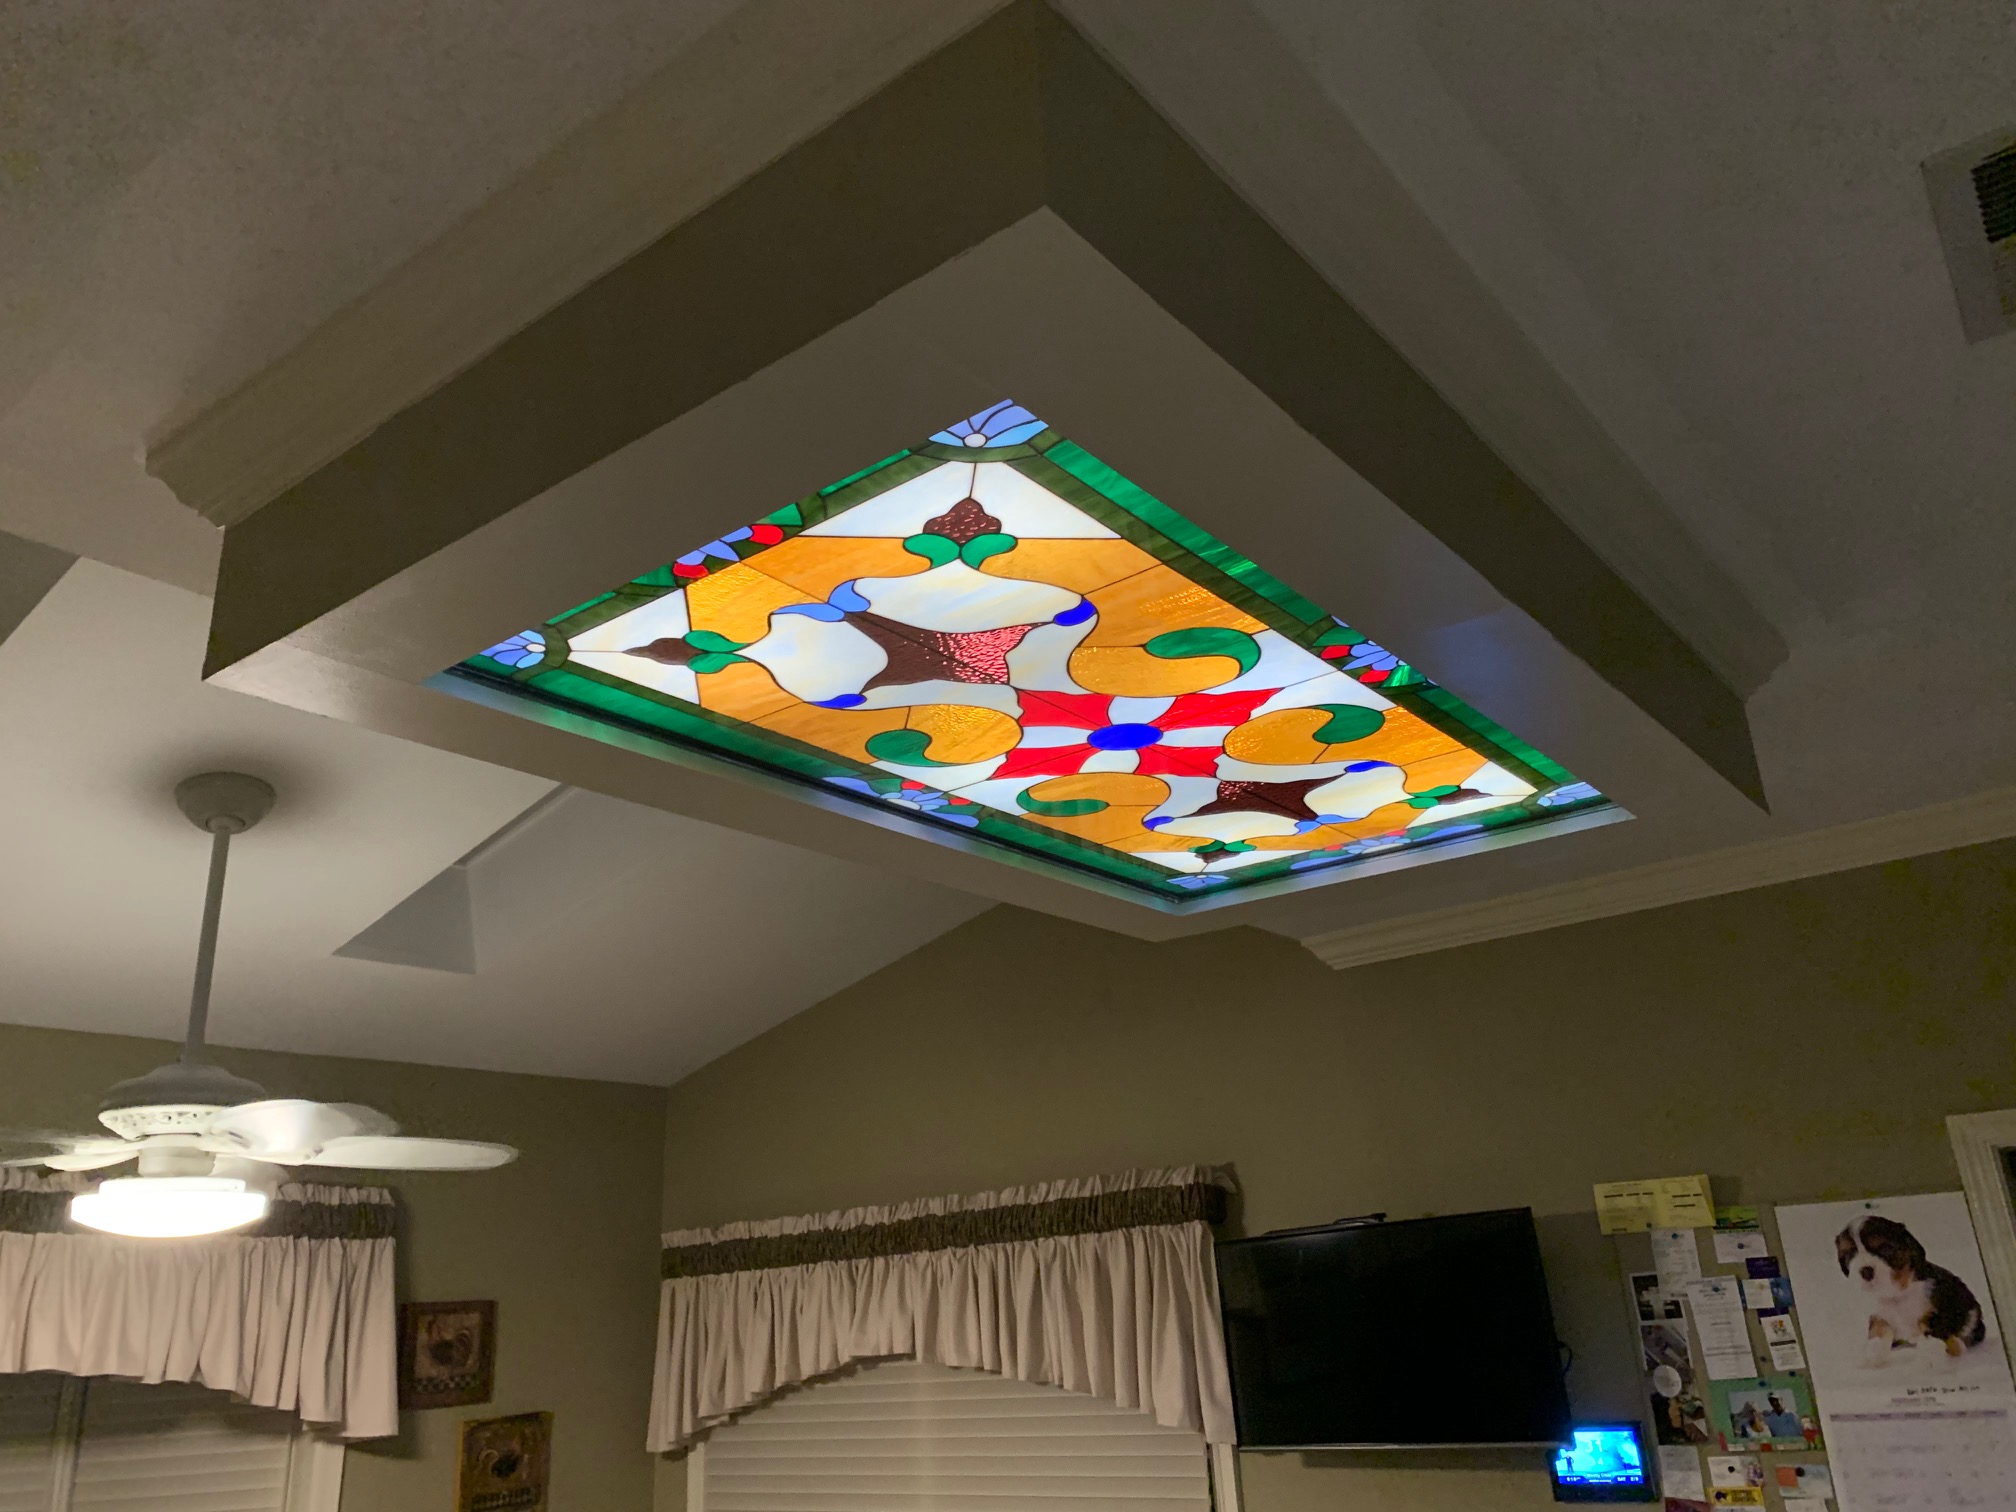 Ceiling Stained Glass Panel For Ambiance And Beauty